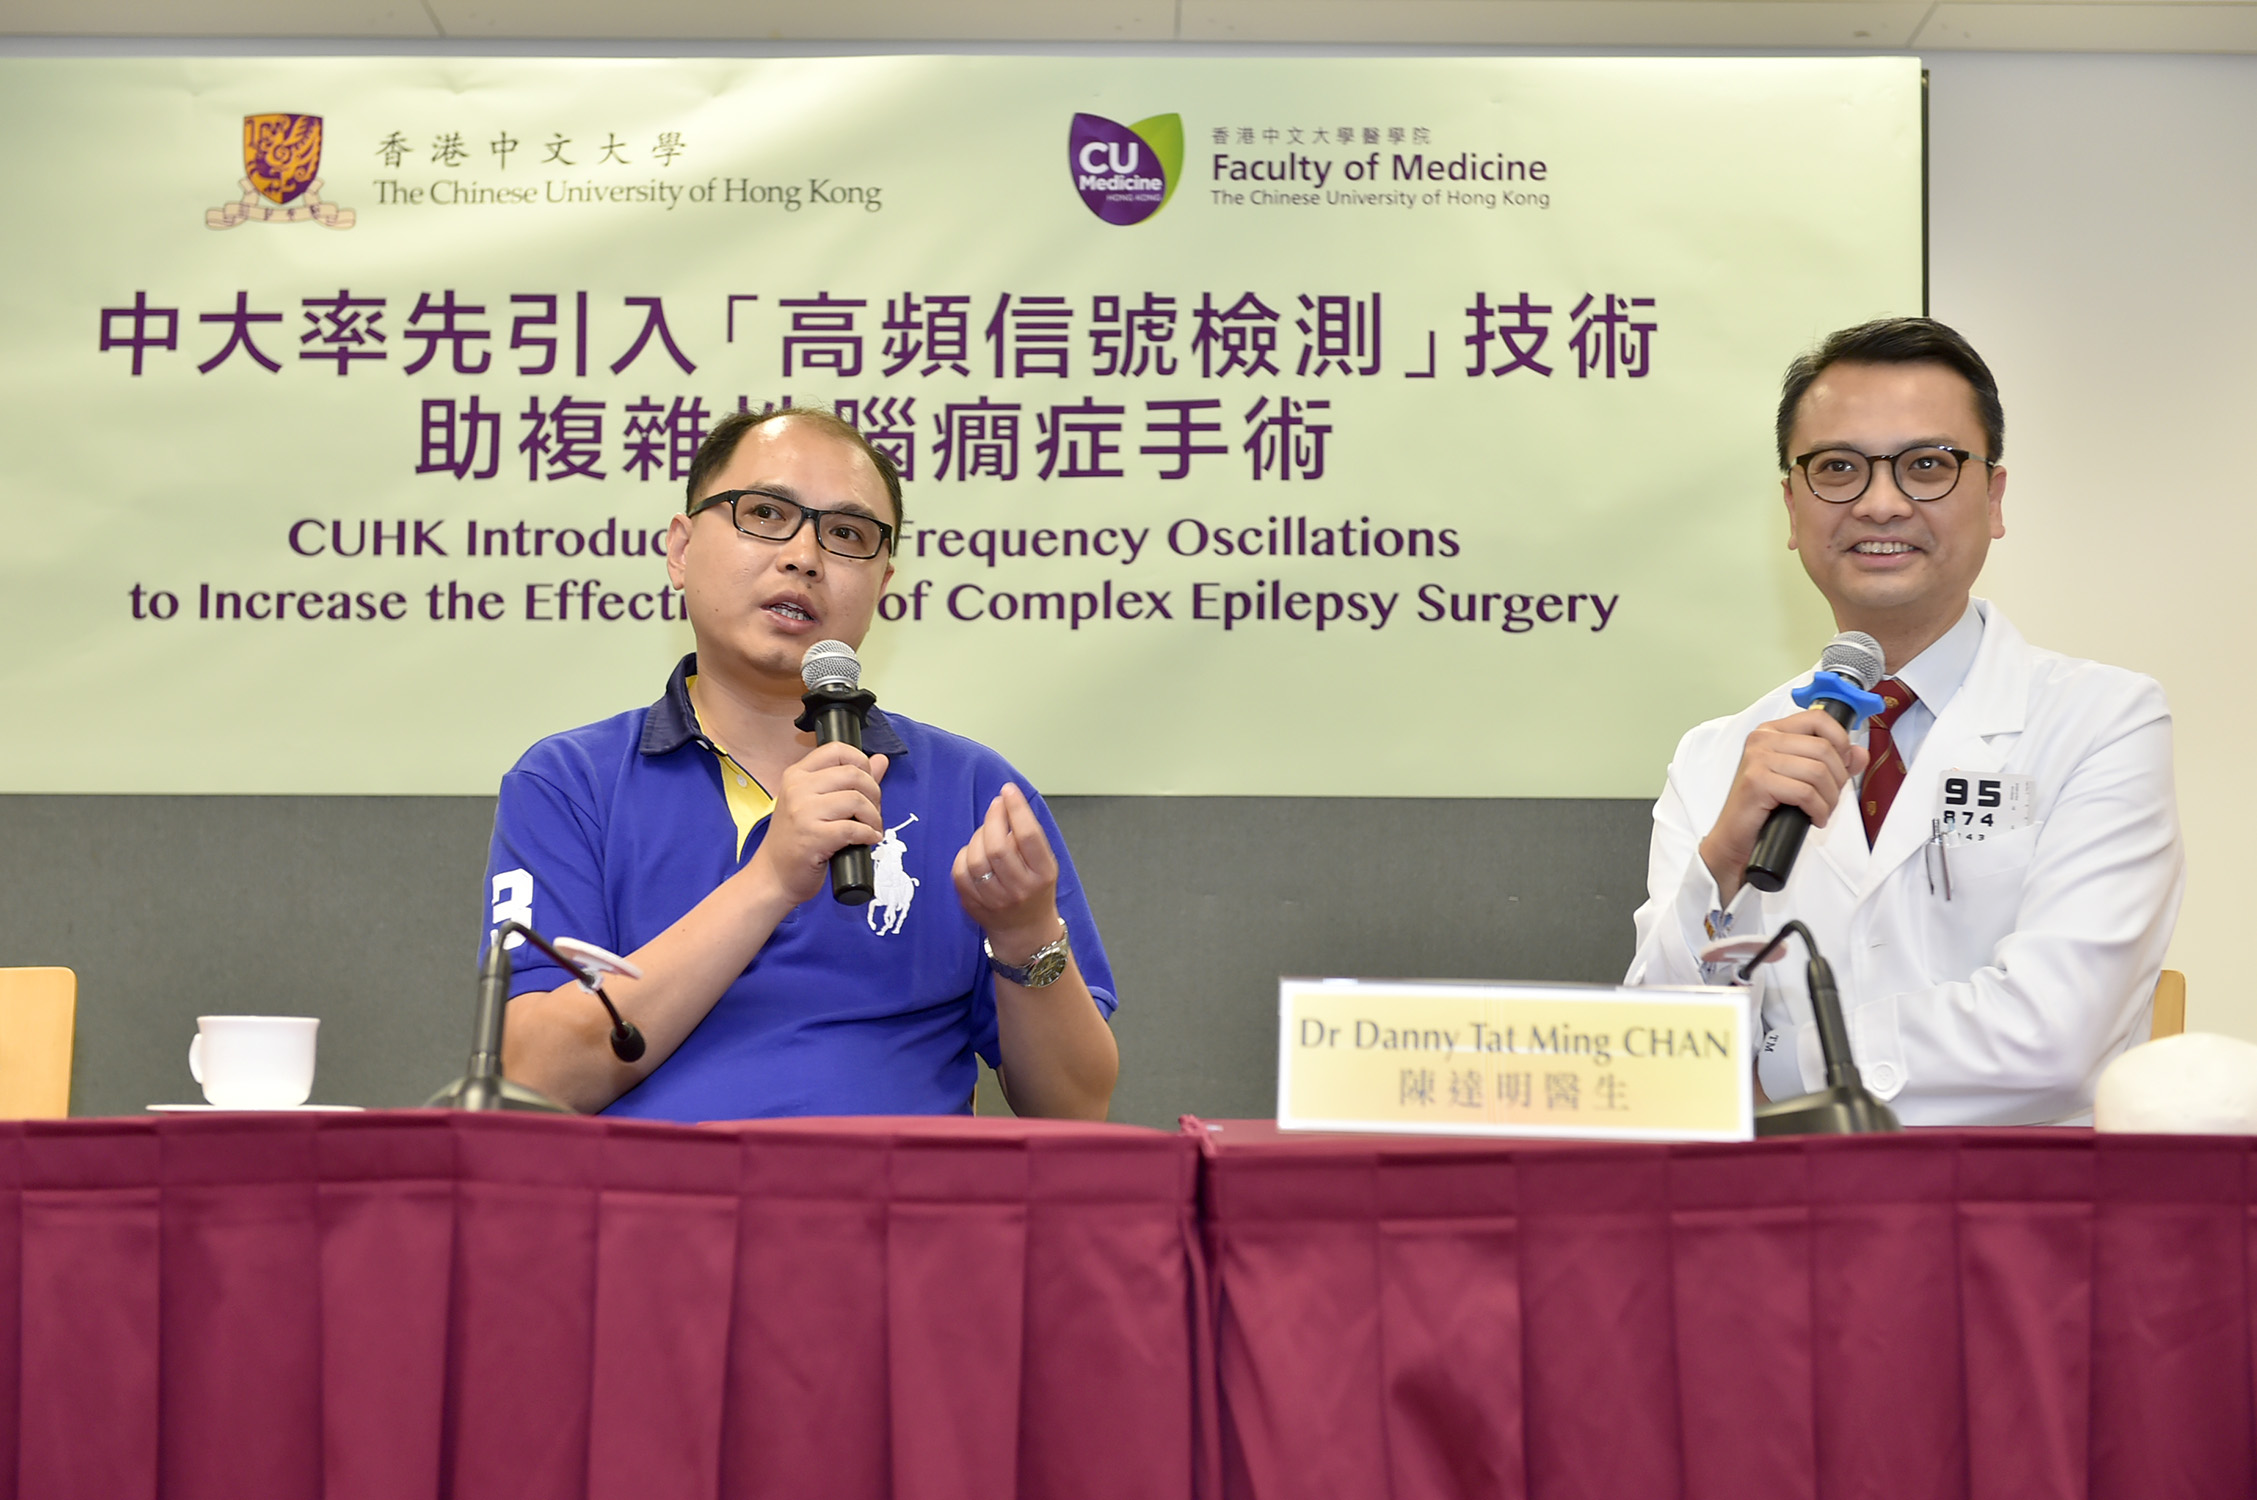 Mr. Au Yeung (left), who had suffered from complex epilepsy for 28 years, received intracranial electroencephalography (EEG) and high frequency oscillations (HFOs) monitoring in 2014. With the focal origin successfully located and resected, his frequency of incidence has dropped from around 20 to 4 seizures per year with much lighter symptoms.